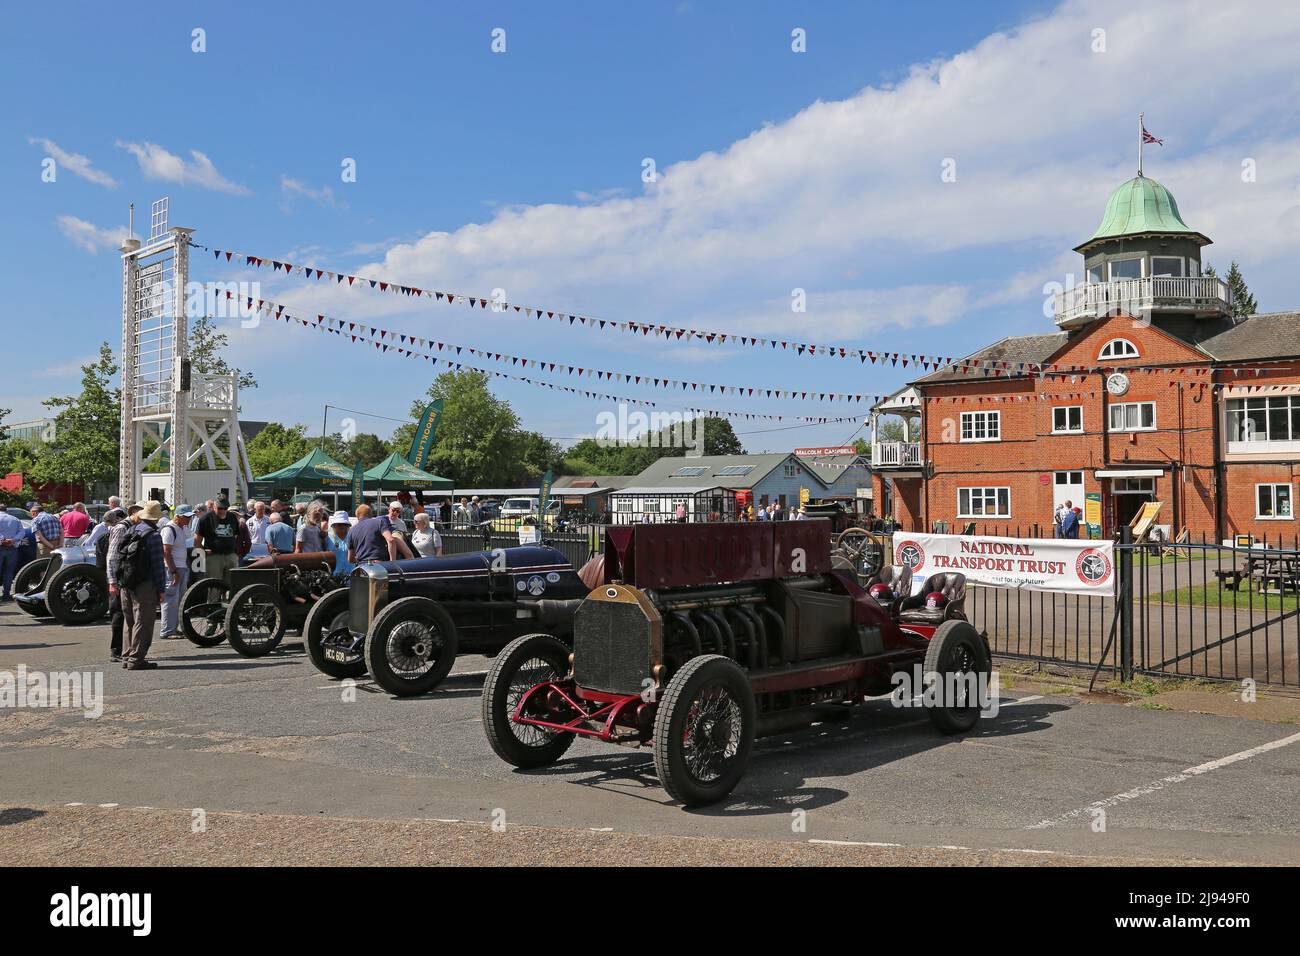 Historic record holders in Outer Paddock, Centenary of Speed, 17 May 2022, Brooklands Museum, Weybridge, Surrey, England, Great Britain, UK, Europe Stock Photo